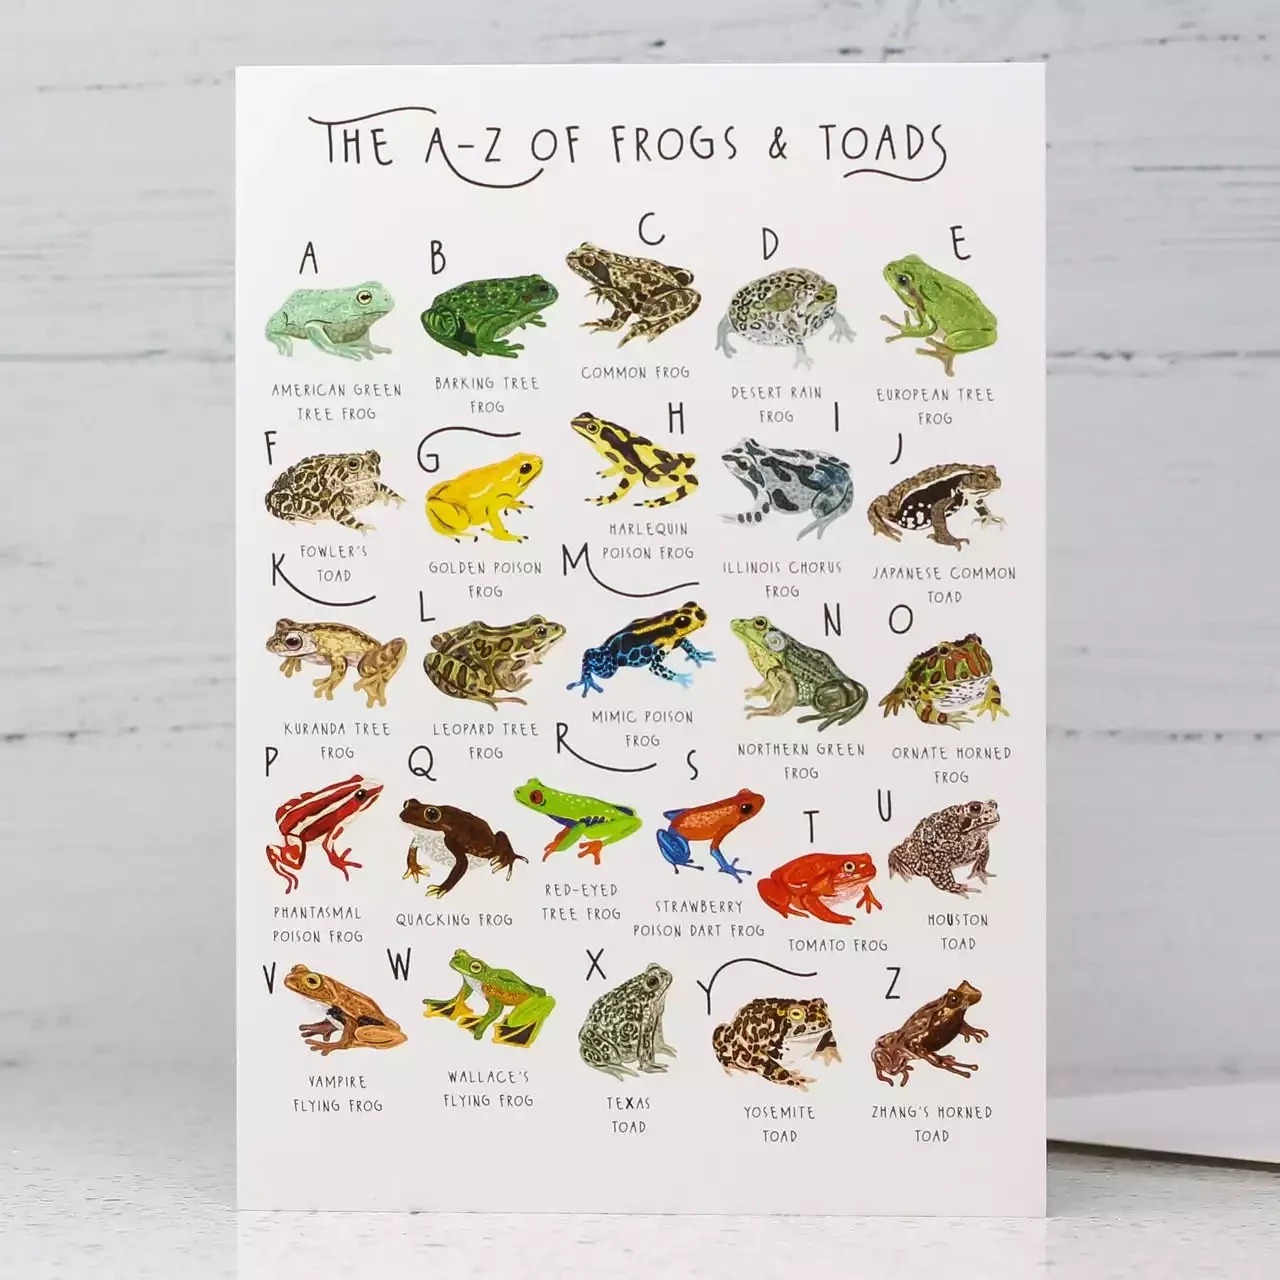 A-z of Frogs and Toads Card by Bea Baranowska